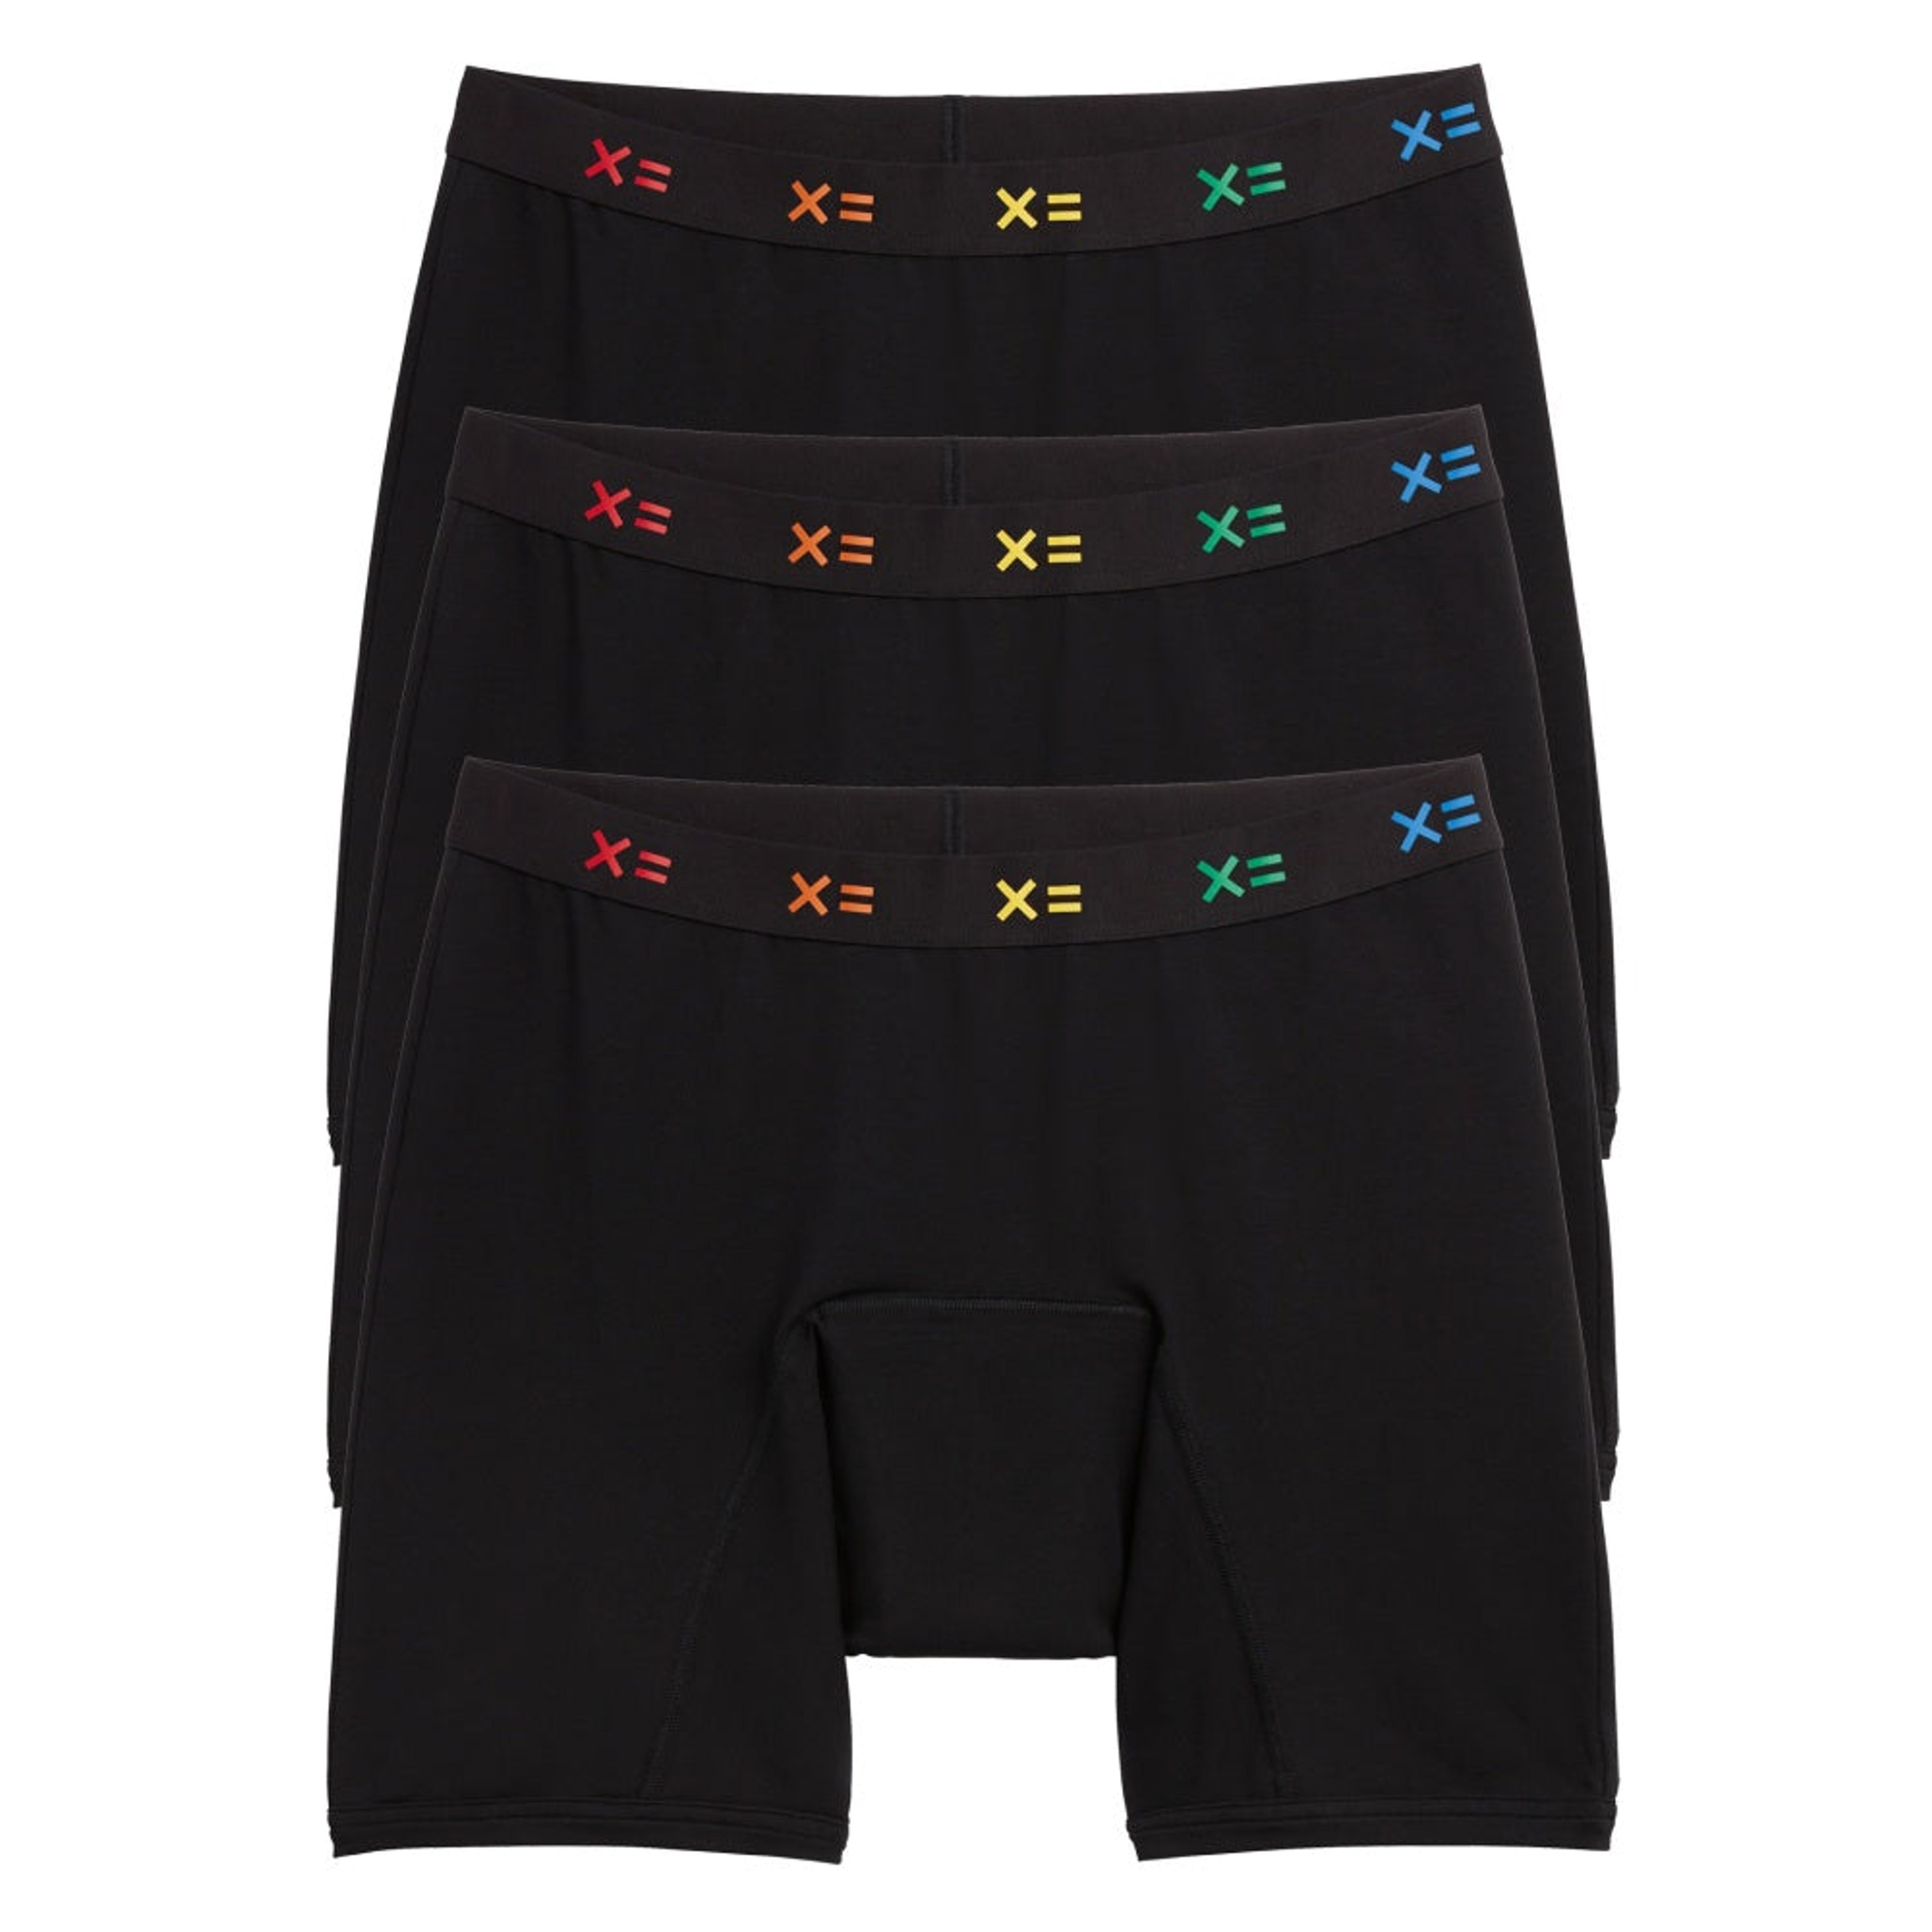 https://cdn.prod.marmalade.co/products/3840x3840/filters:quality(80)/www.tomboyx.com%2Fproducts%2Ffirst-line-period-9-boxer-briefs-3-pack-black-x-rainbow%2F1700005905%2FFirst_Line_Chai_4.5in_3pk_c223f907-21c3-4d88-857f-41f9400ded10.jpg